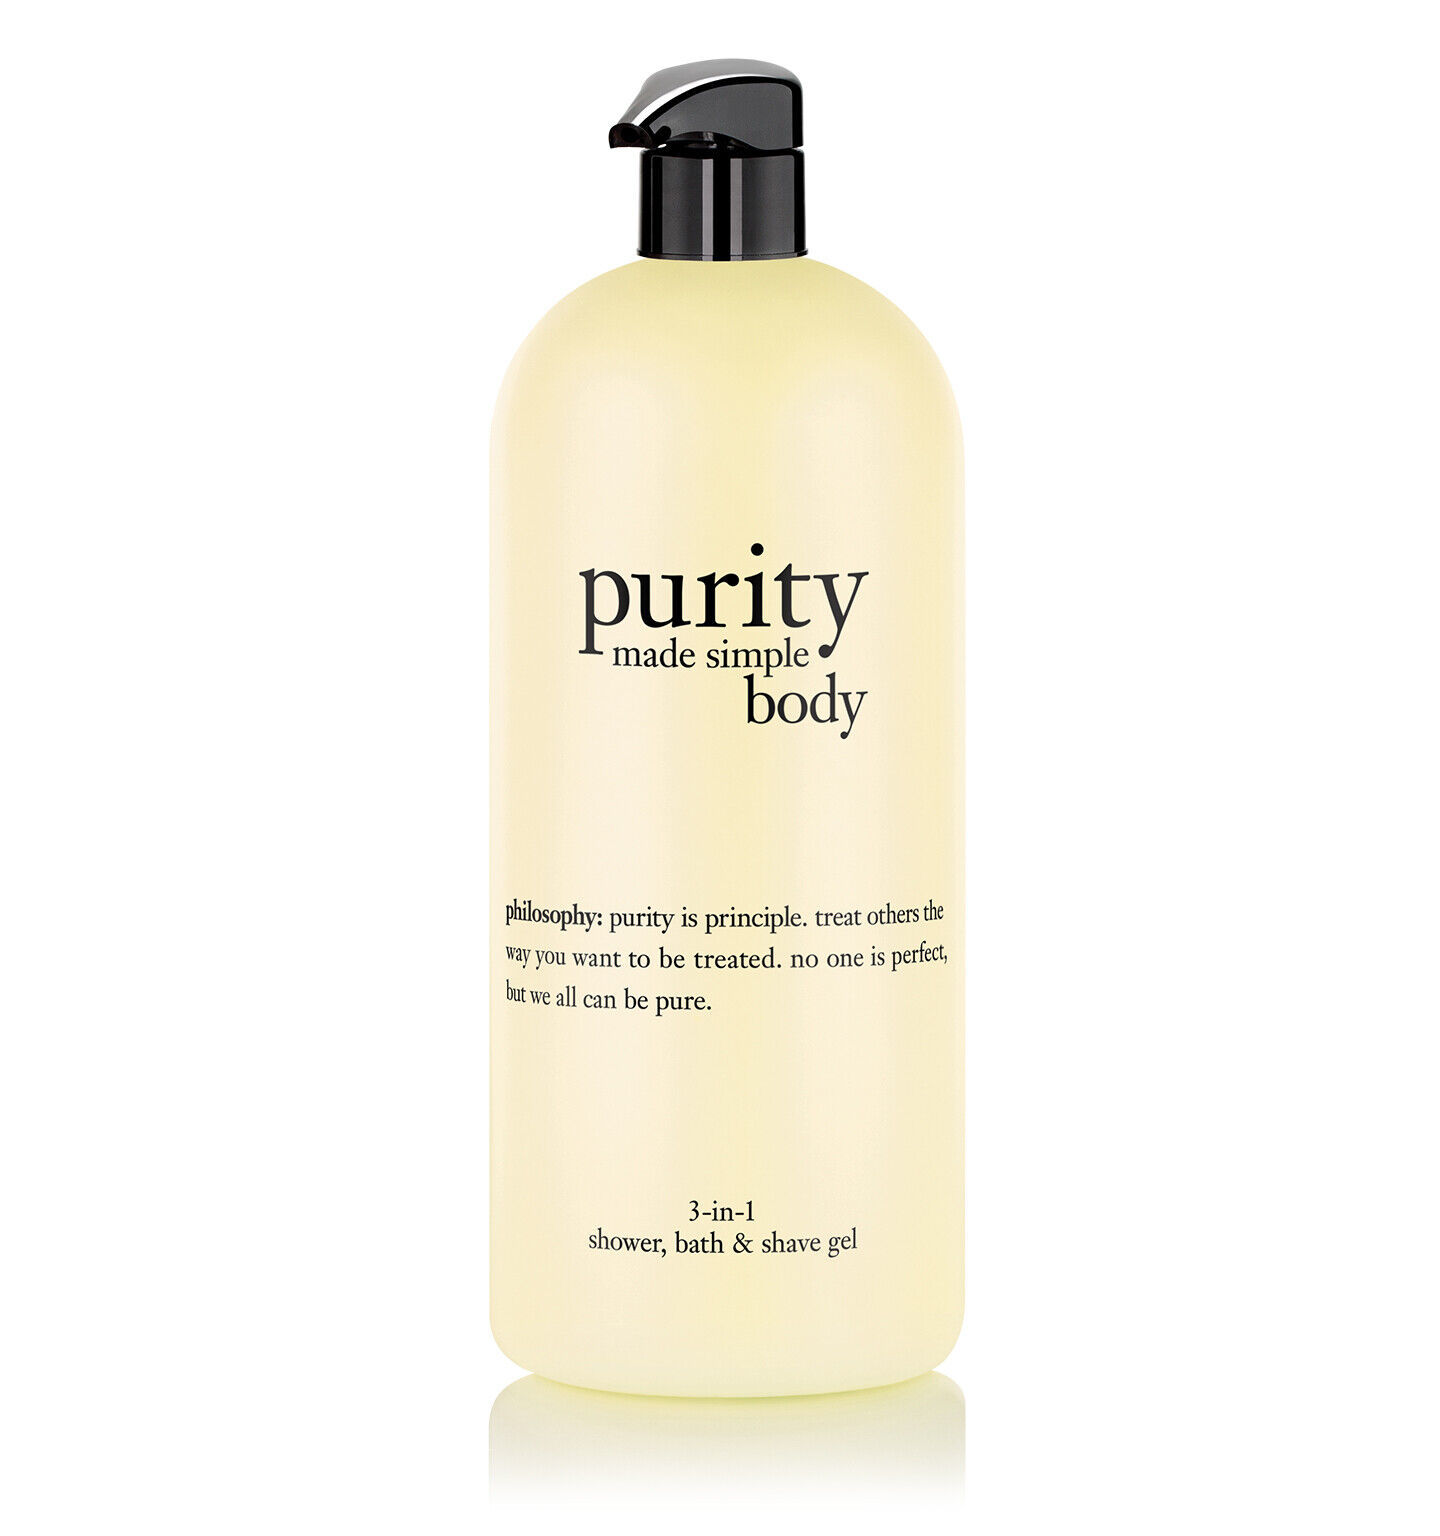 Primary image for philosophy 3-in-1 shower, bath & shave gel purity made simple body 32fl.oz